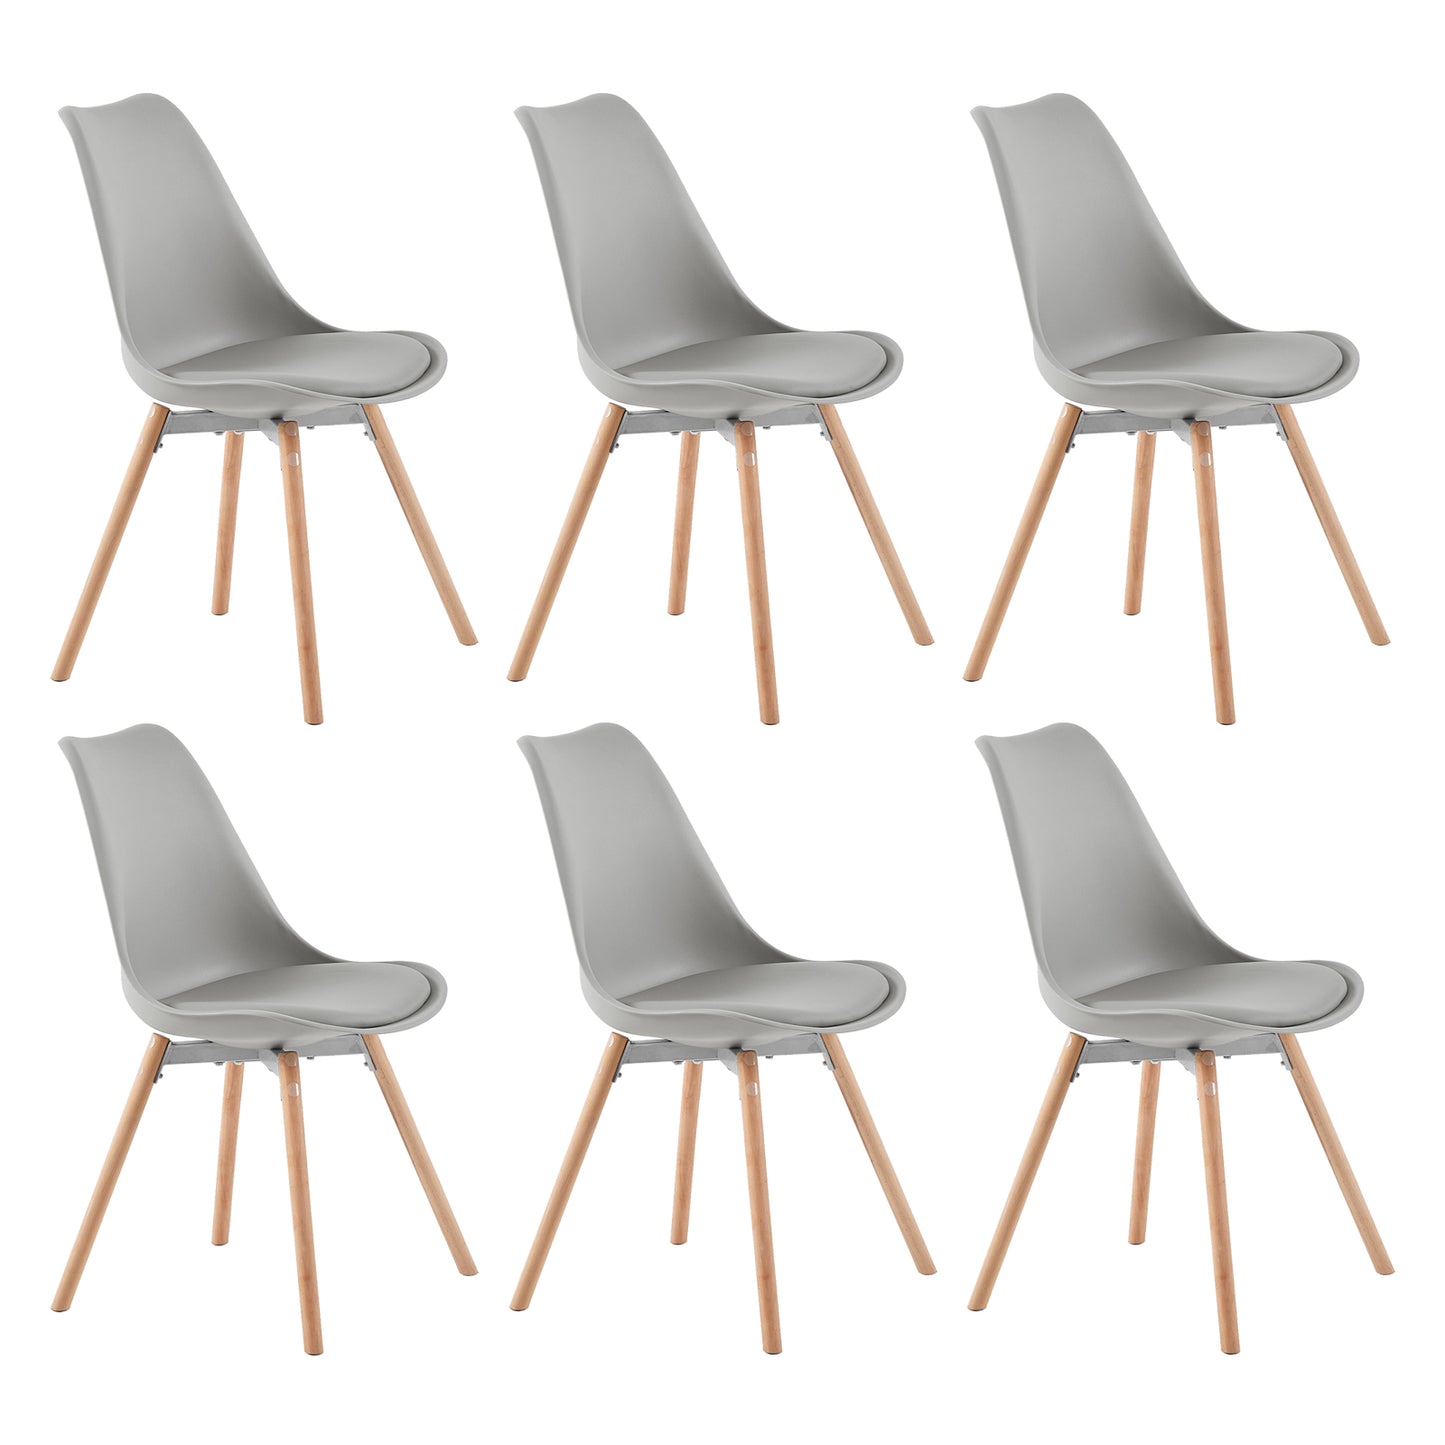 OATS Side Chair (Set of 6)